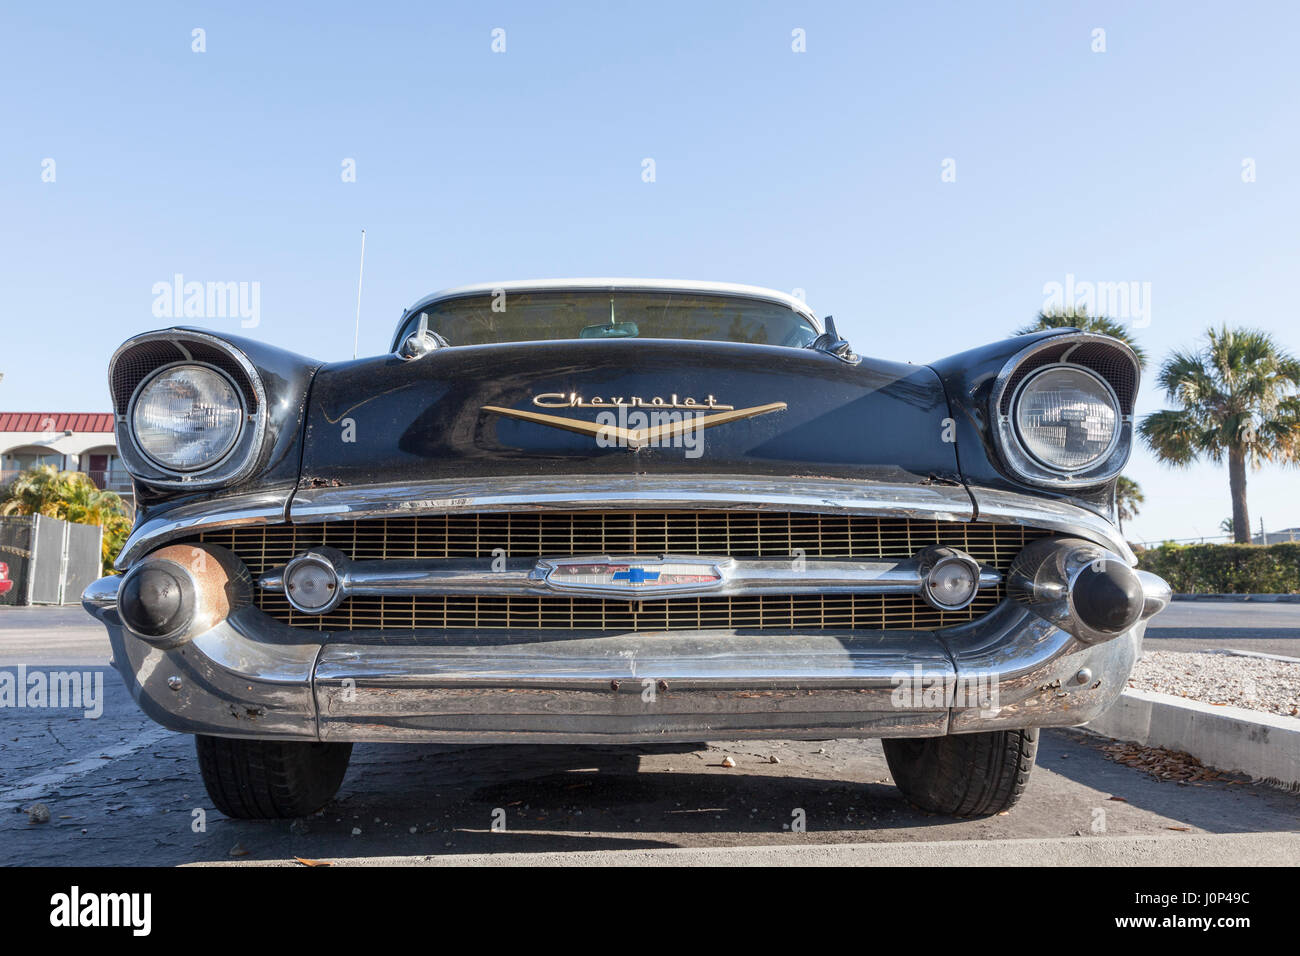 Naples, Fl, USA - March 18, 2017: Frontal view of the 1957 Chevrolet Bel Air. Naples, Florida, United States Stock Photo